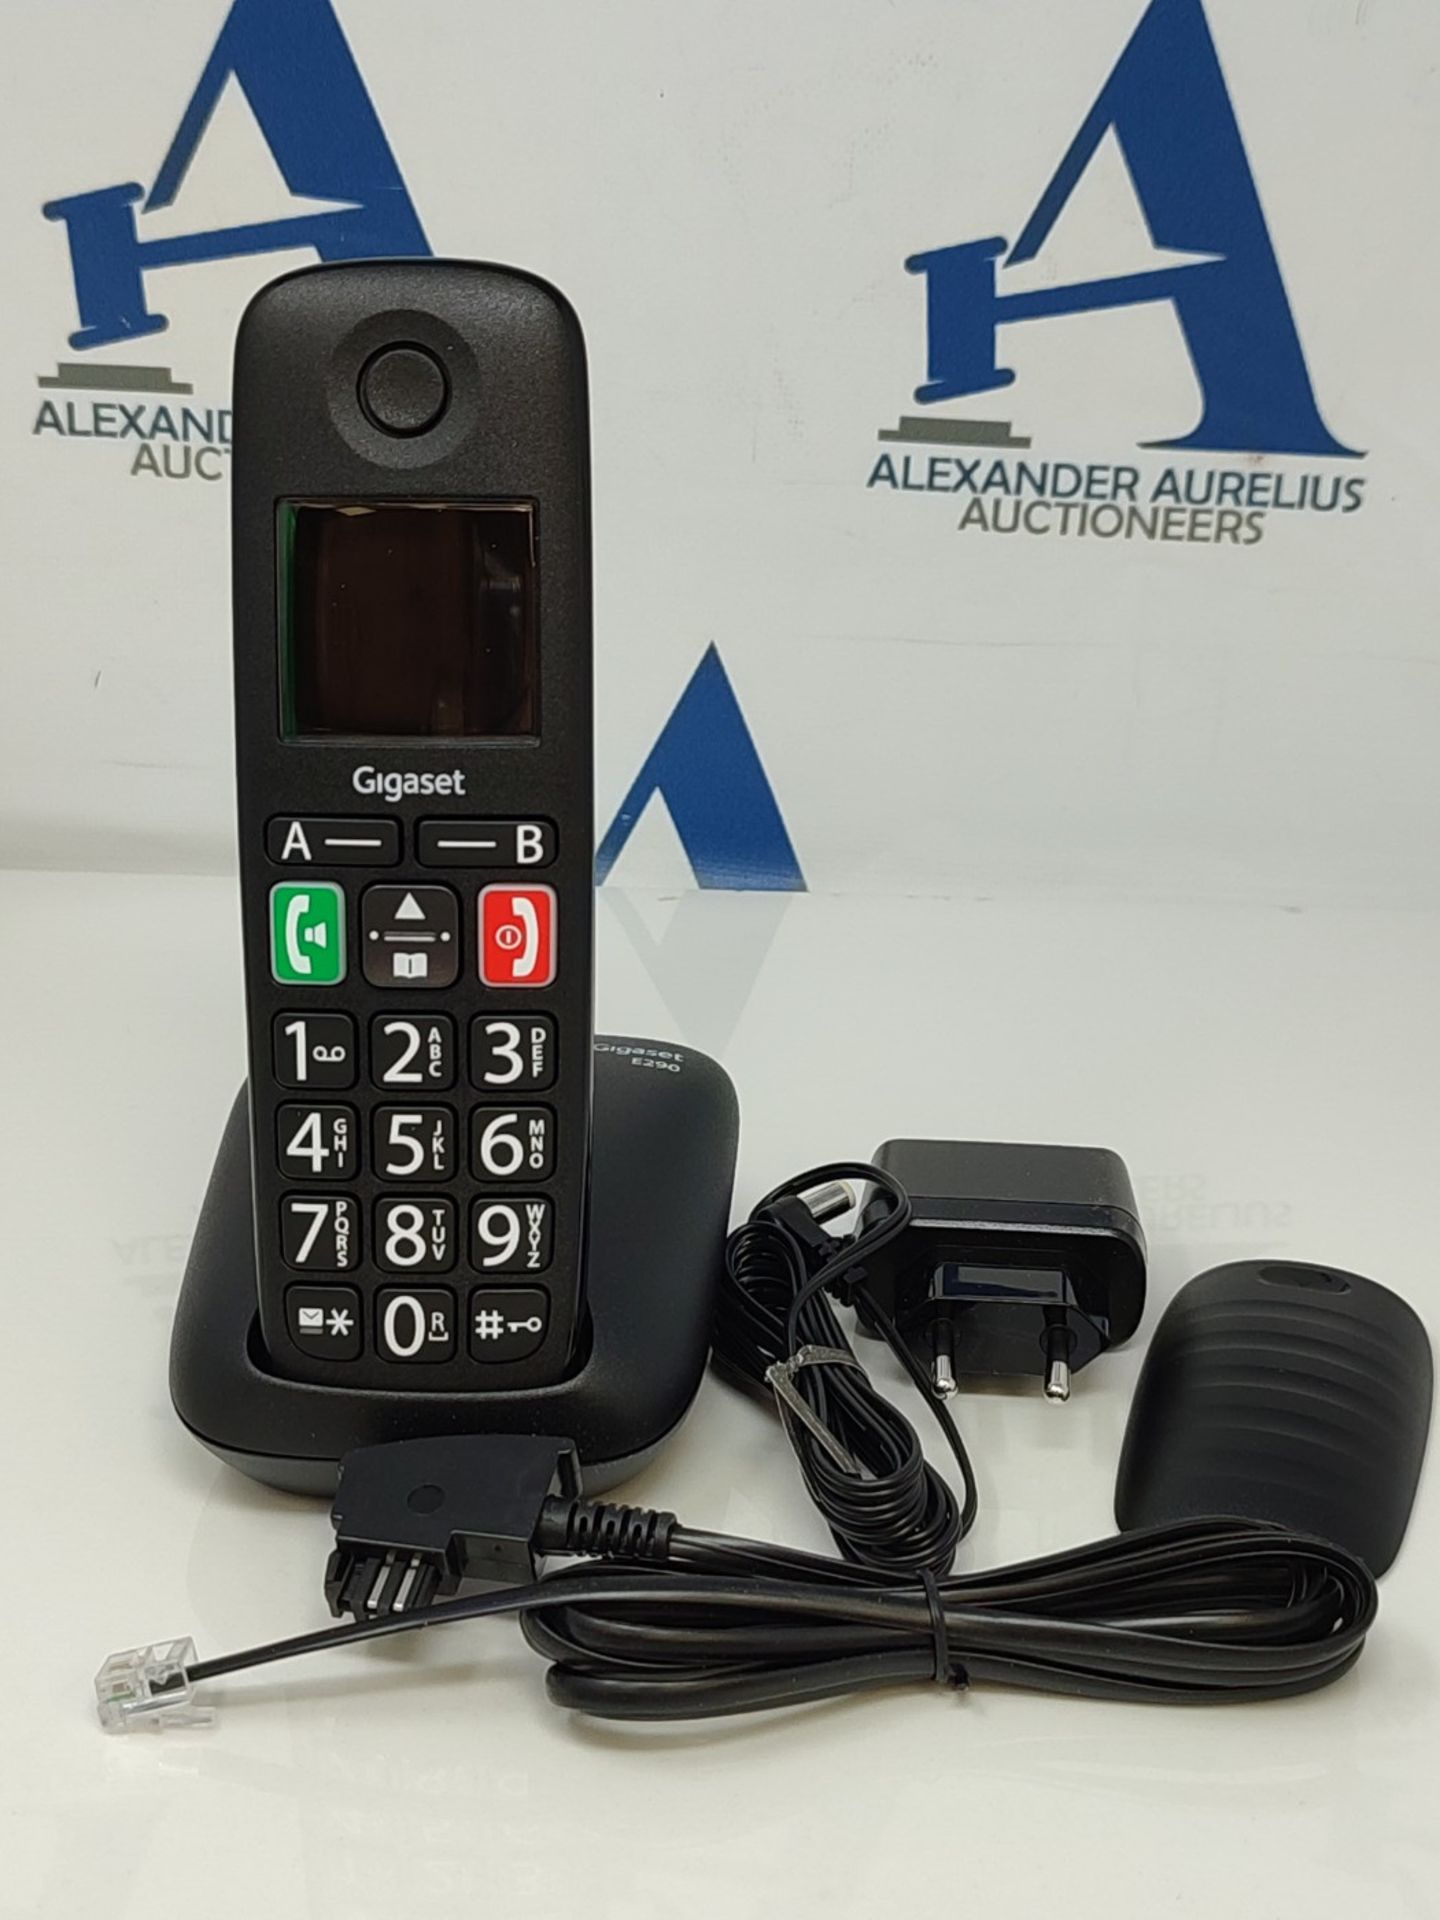 Gigaset E290 - Cordless senior phone without answering machine with large buttons - la - Image 4 of 4